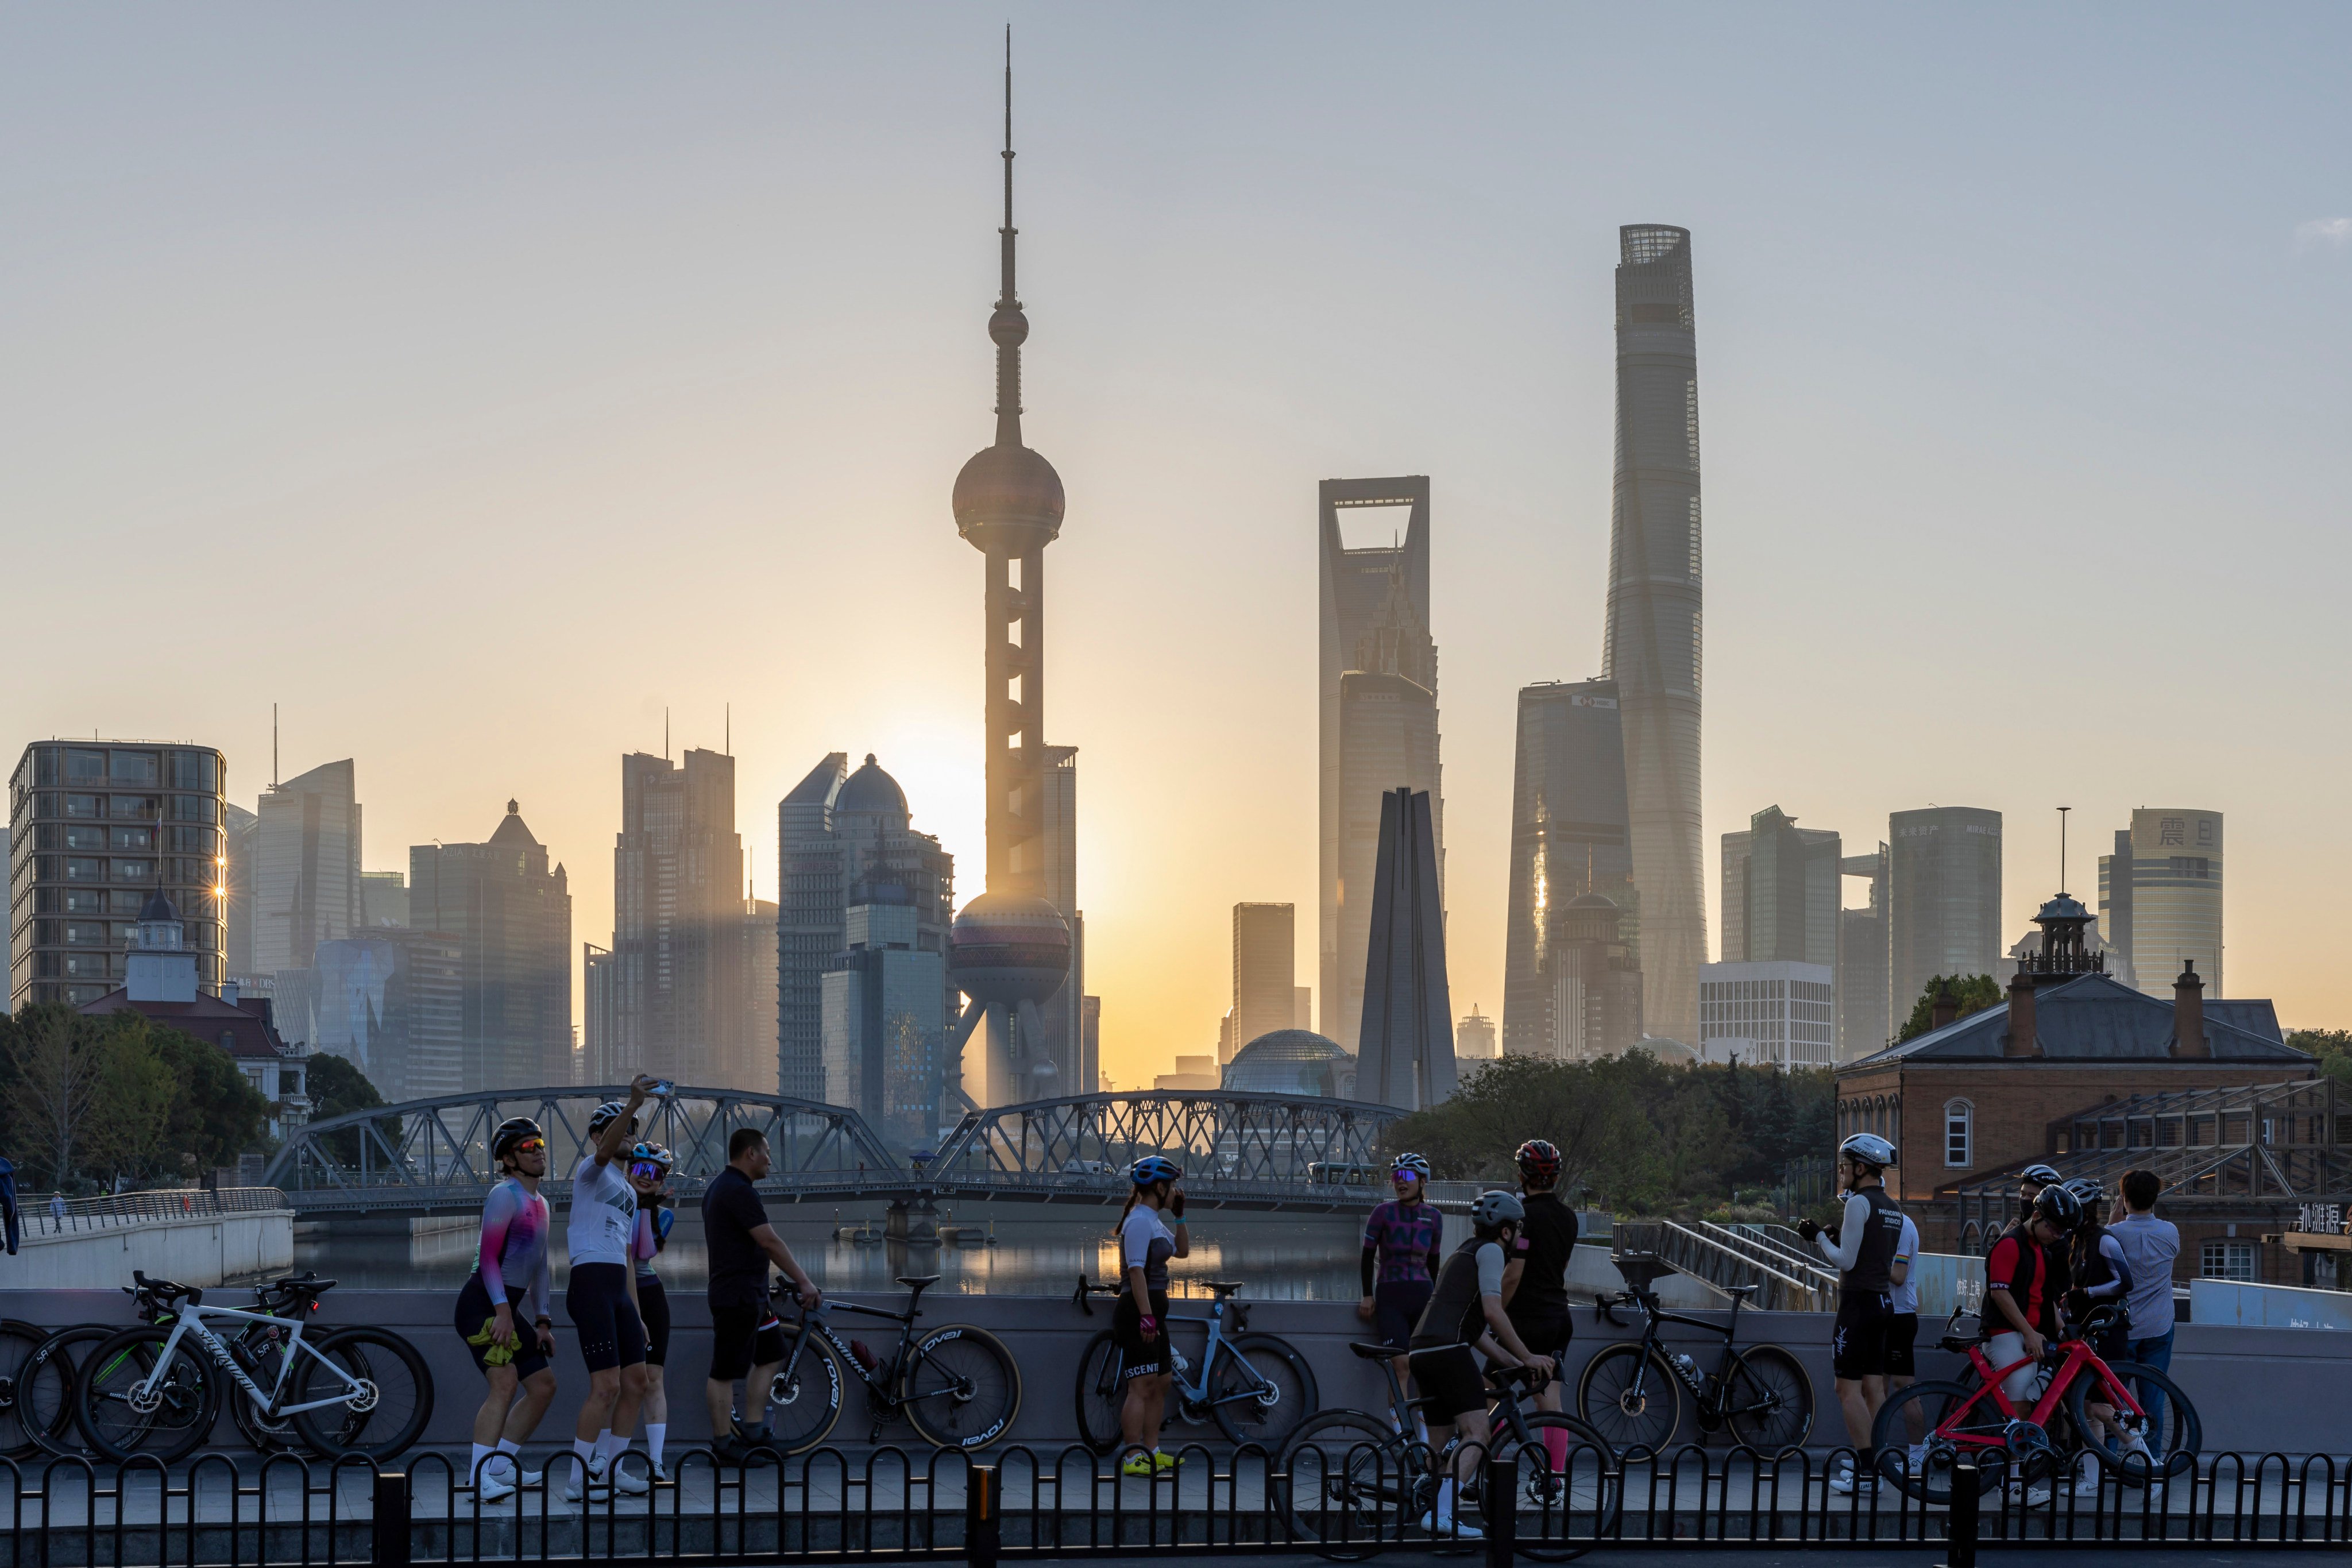 Cyclists rest against the skylines in Pudong, Shanghai on November 3. Photo: AP